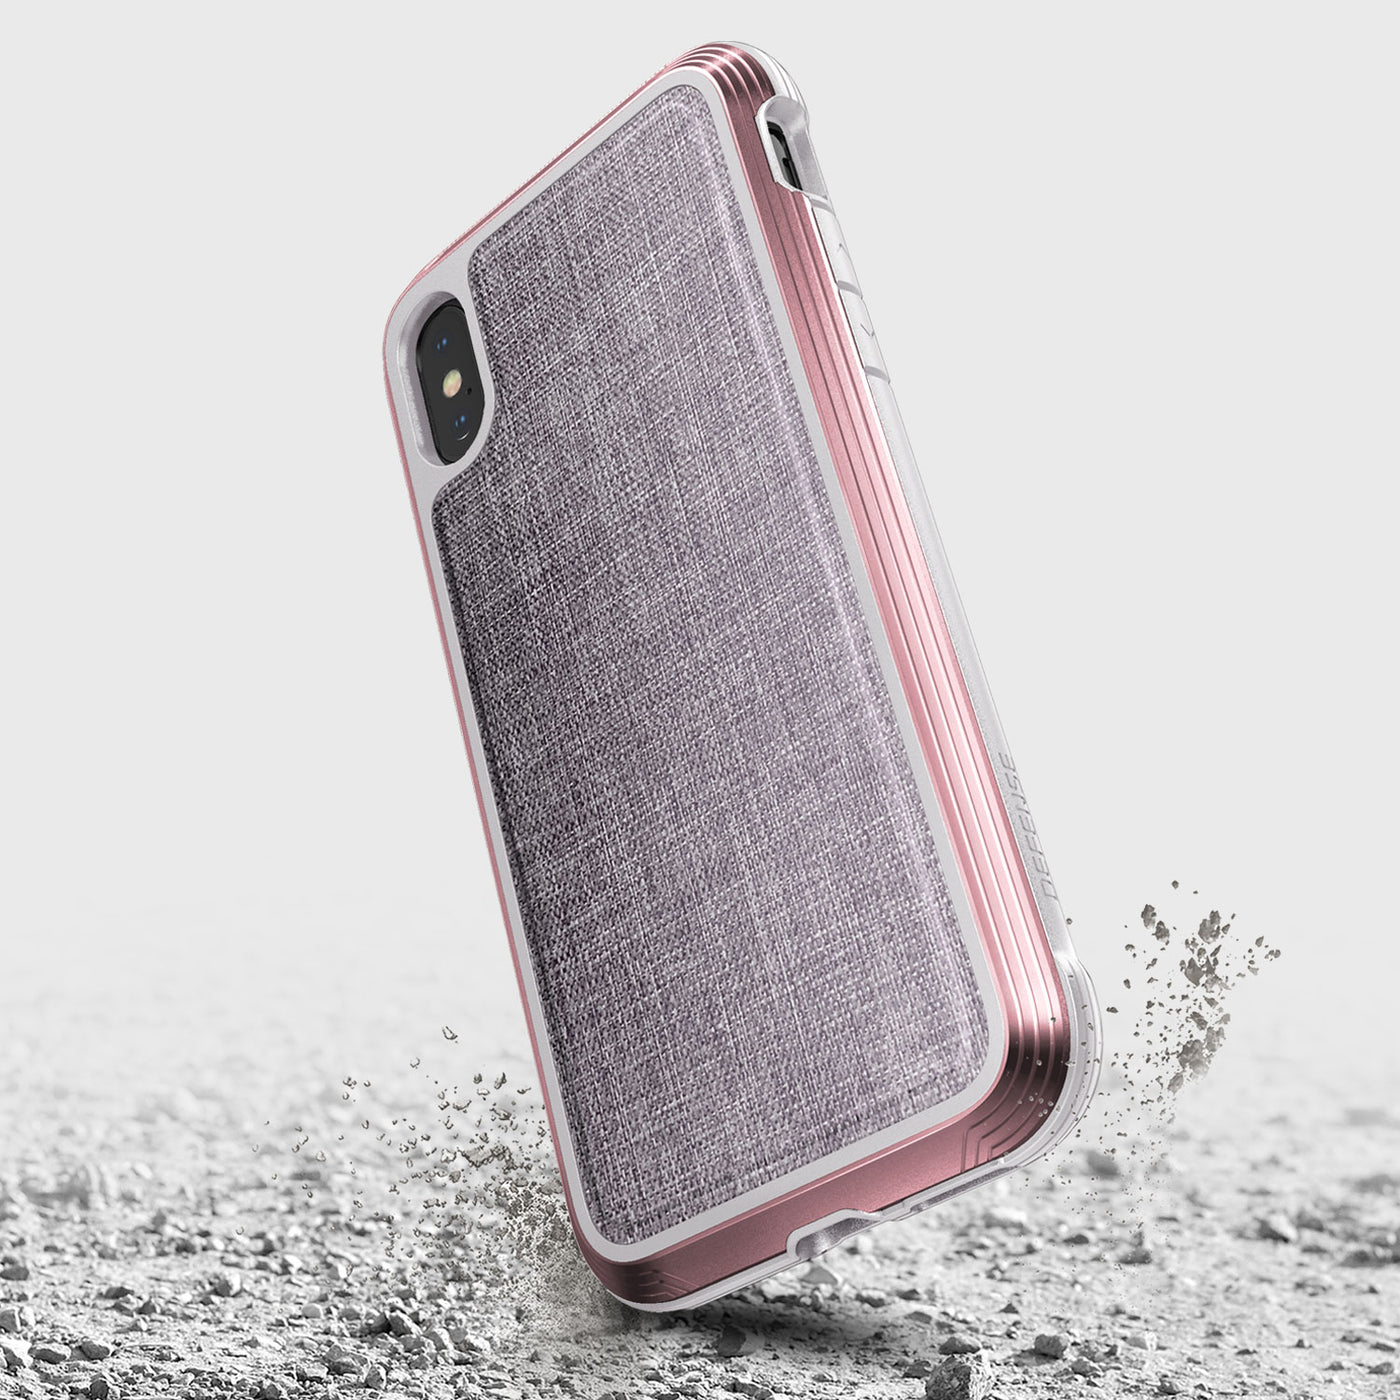 Luxurious Case for iPhone X. Raptic Lux in rose gold.